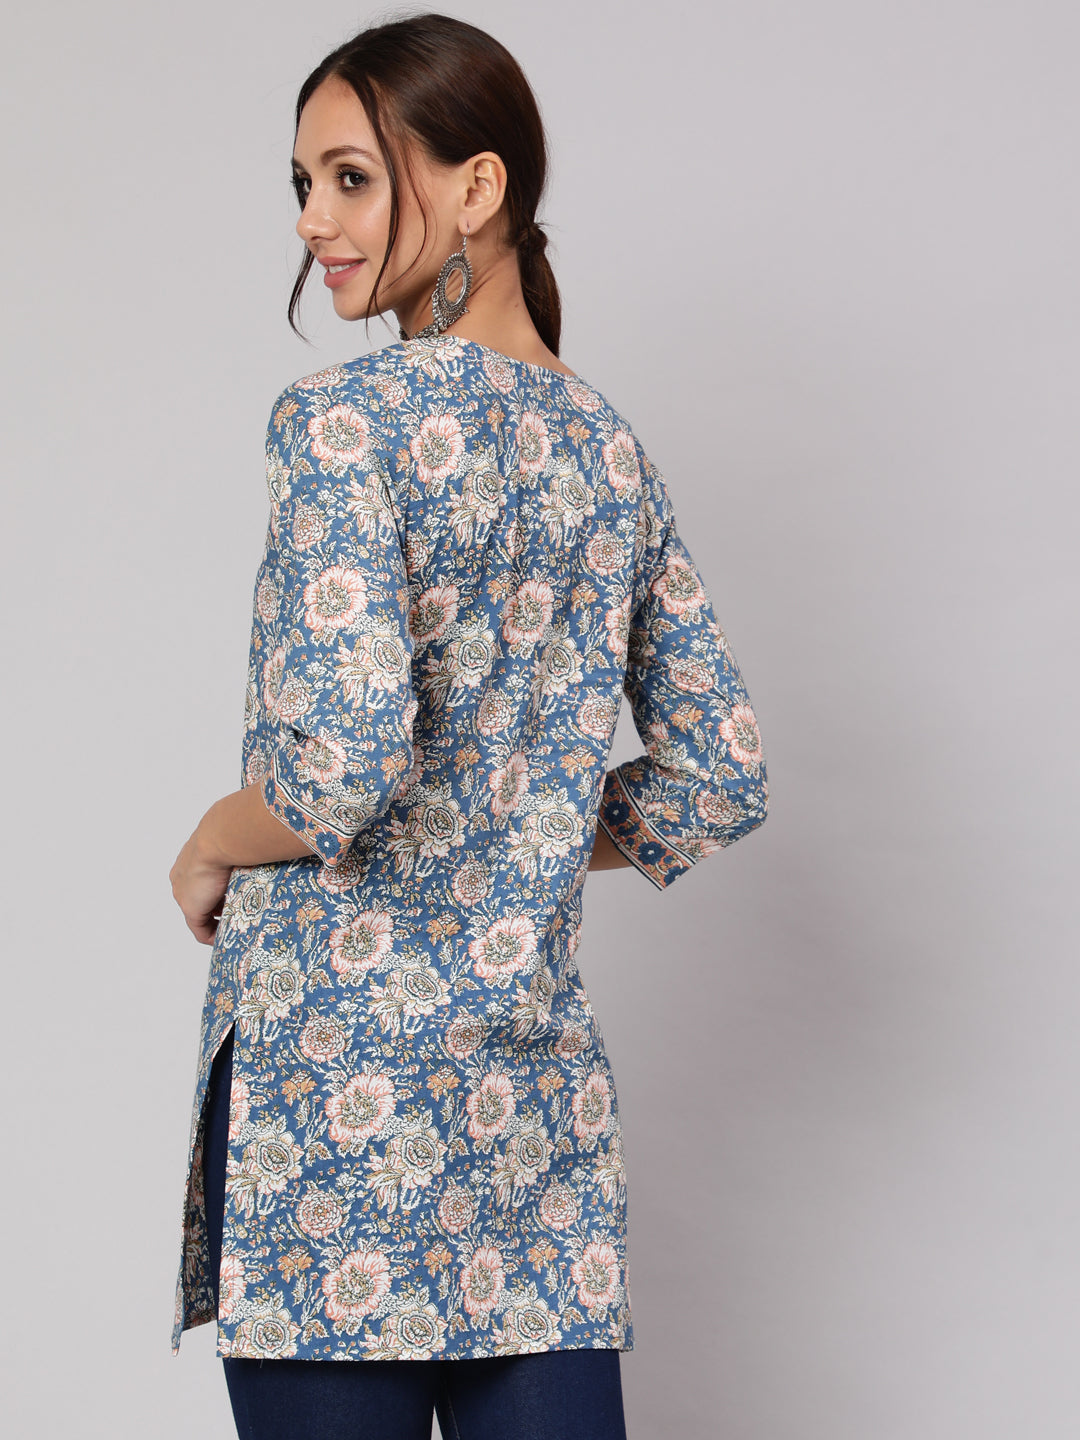 Women's Blue & Pink Floral Printed Straight Tunic With Three Quarter Sleeves - Nayo Clothing USA